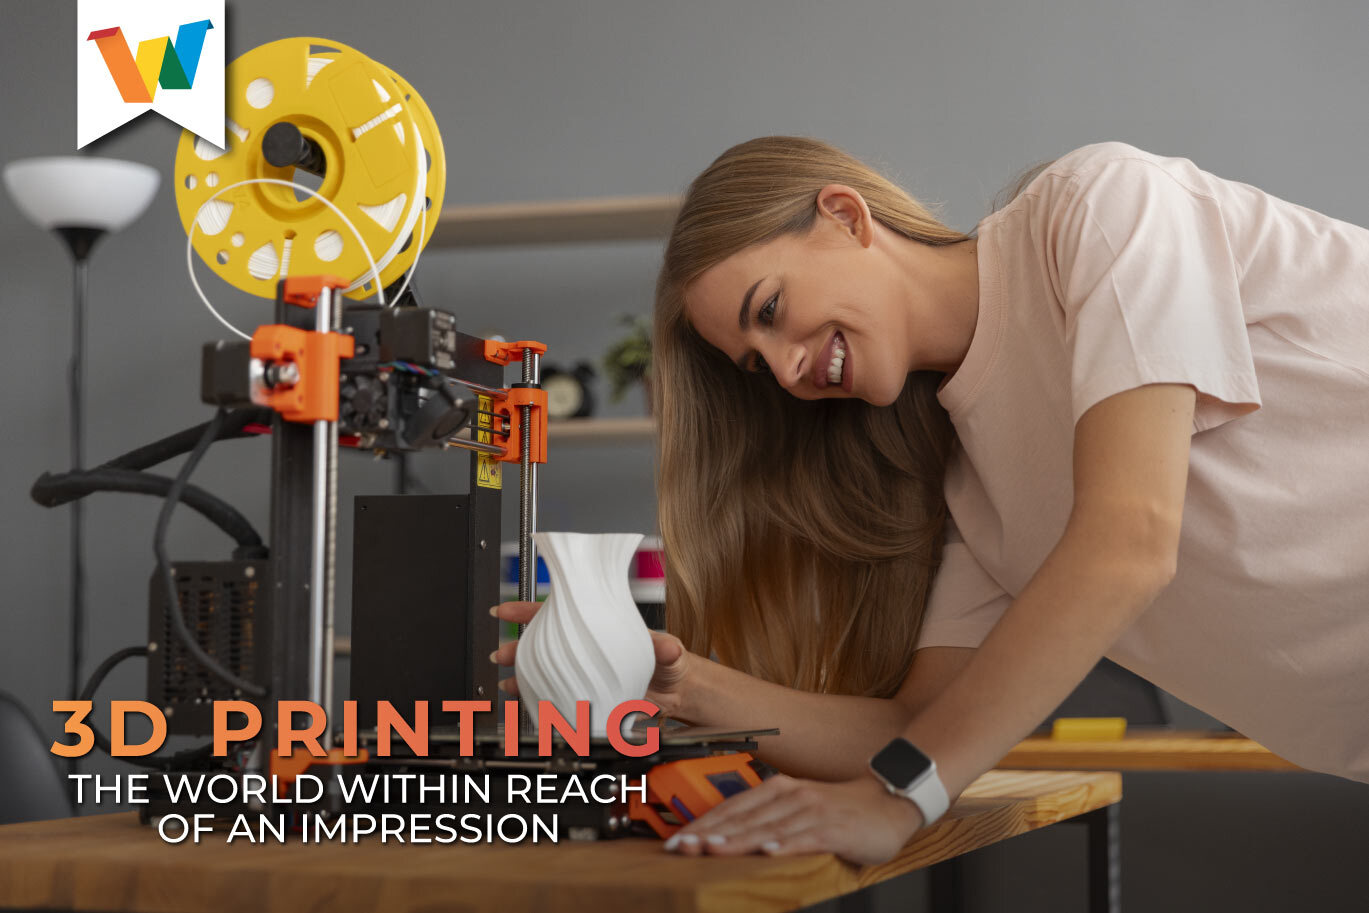 3D Printing. The word within reach of an impression